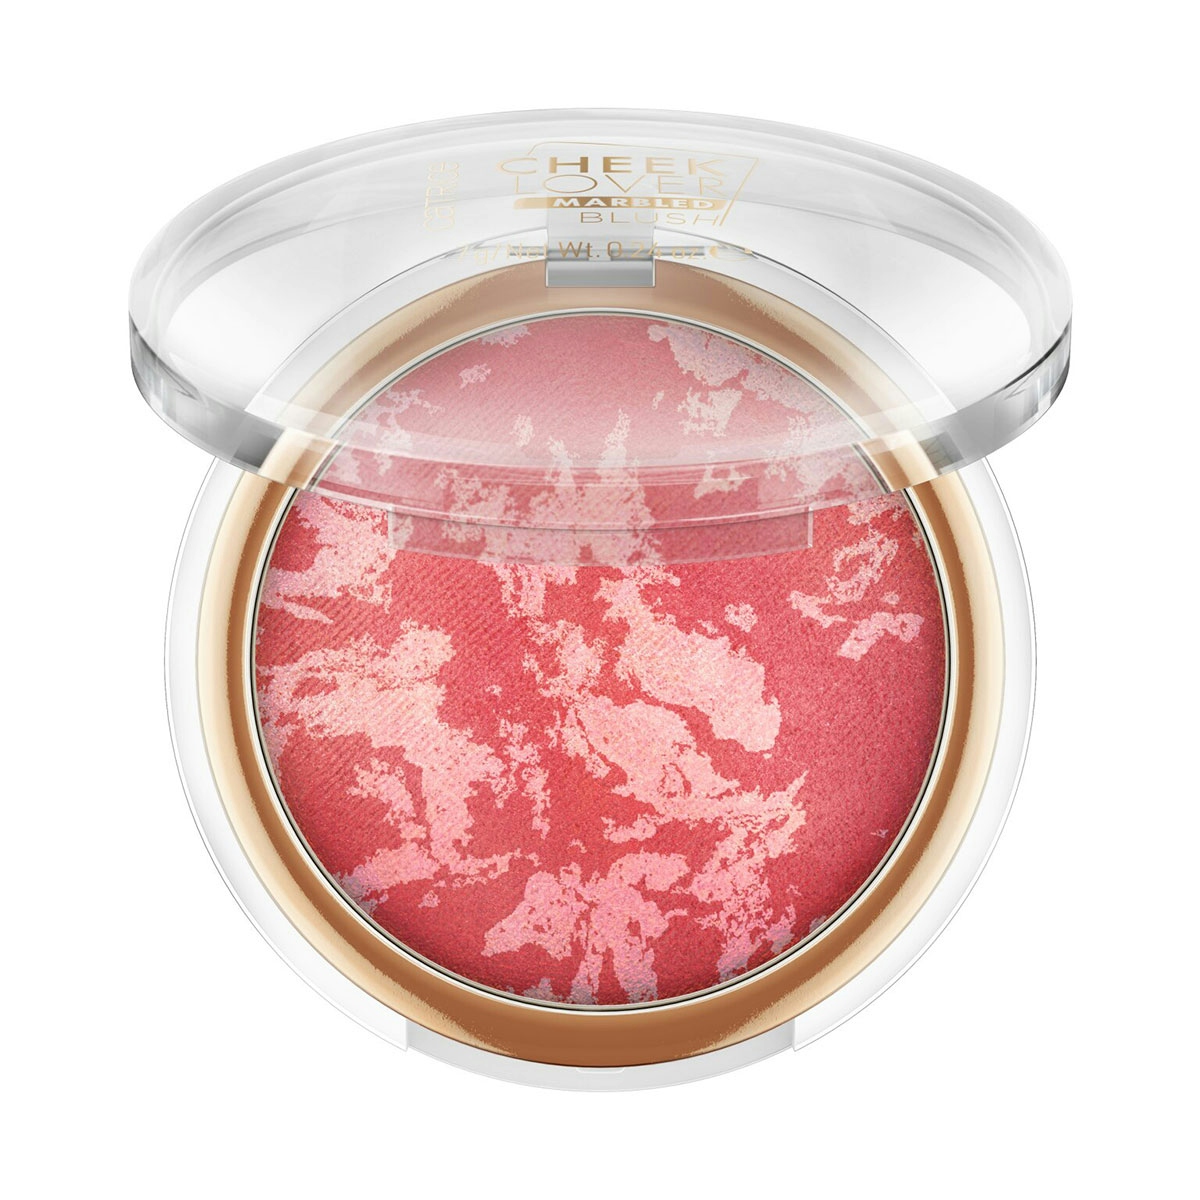 Colorete Cheek Lover Marbled 010